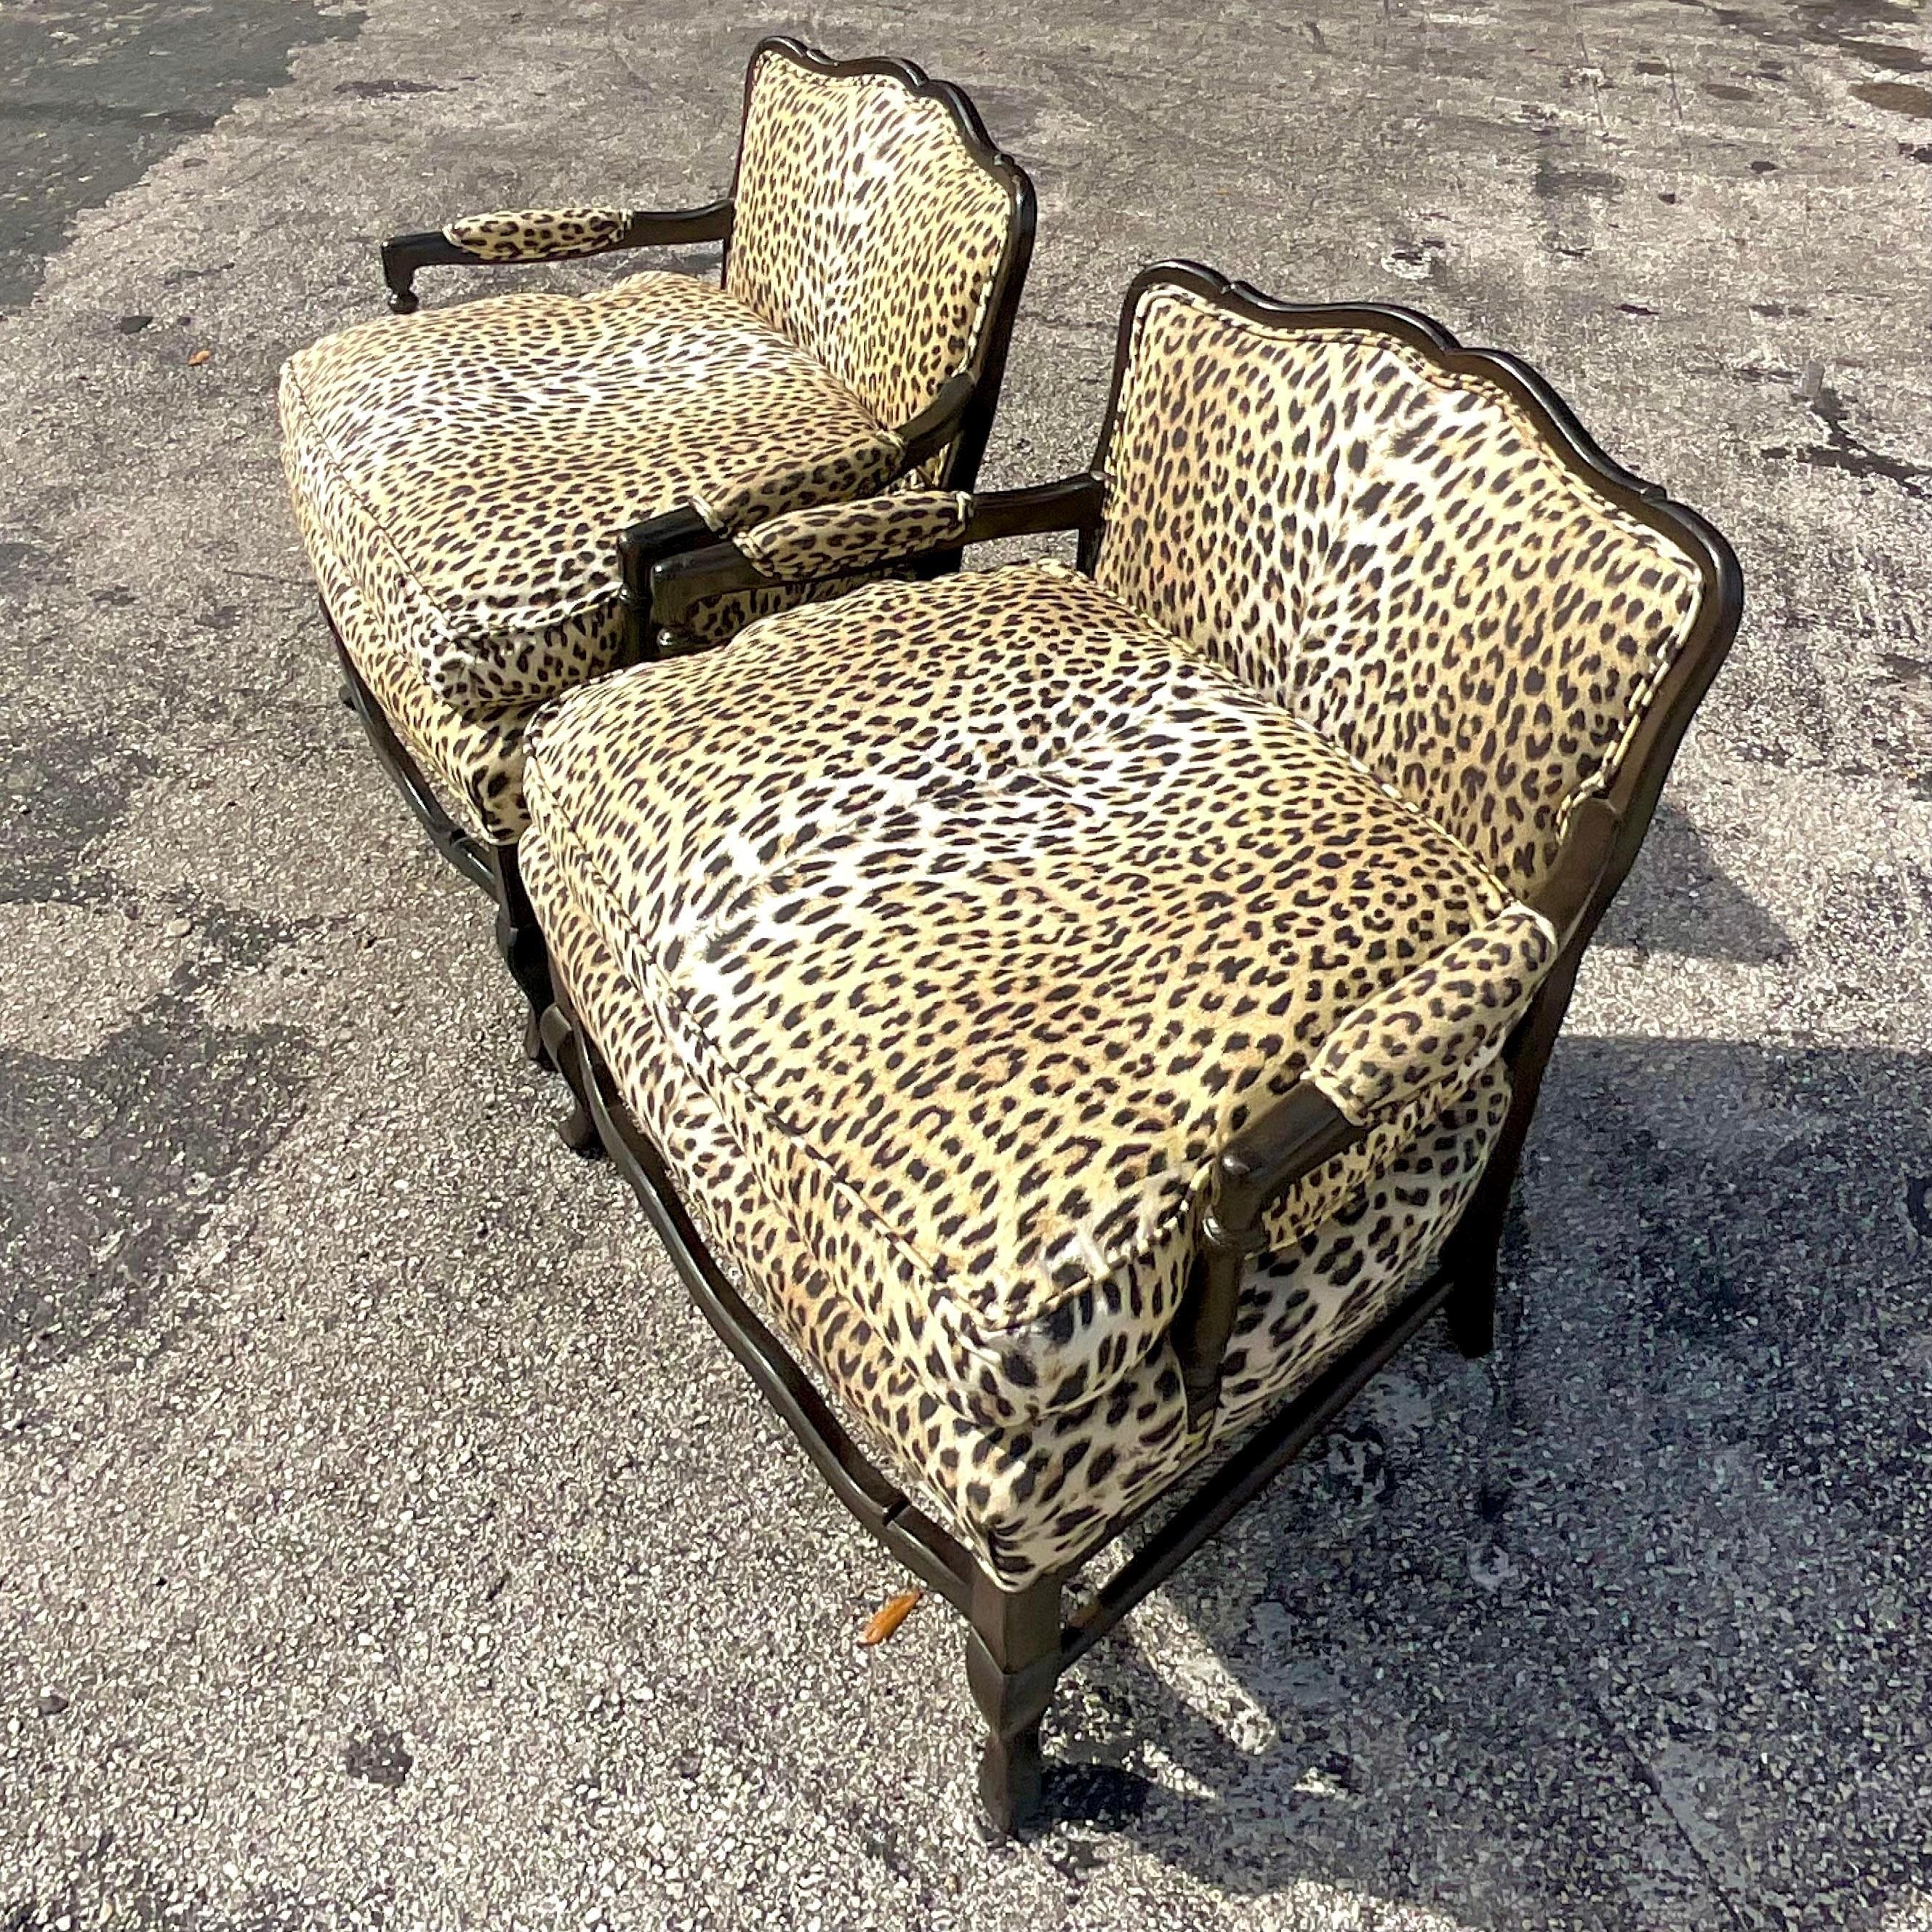 A fantastic pair of vintage Regency Bergere chairs. A chic printed leopard on thick down upholstery. A classic retro shape with a lower back panel for glamour. Acquired from a Palm Beach estate. 